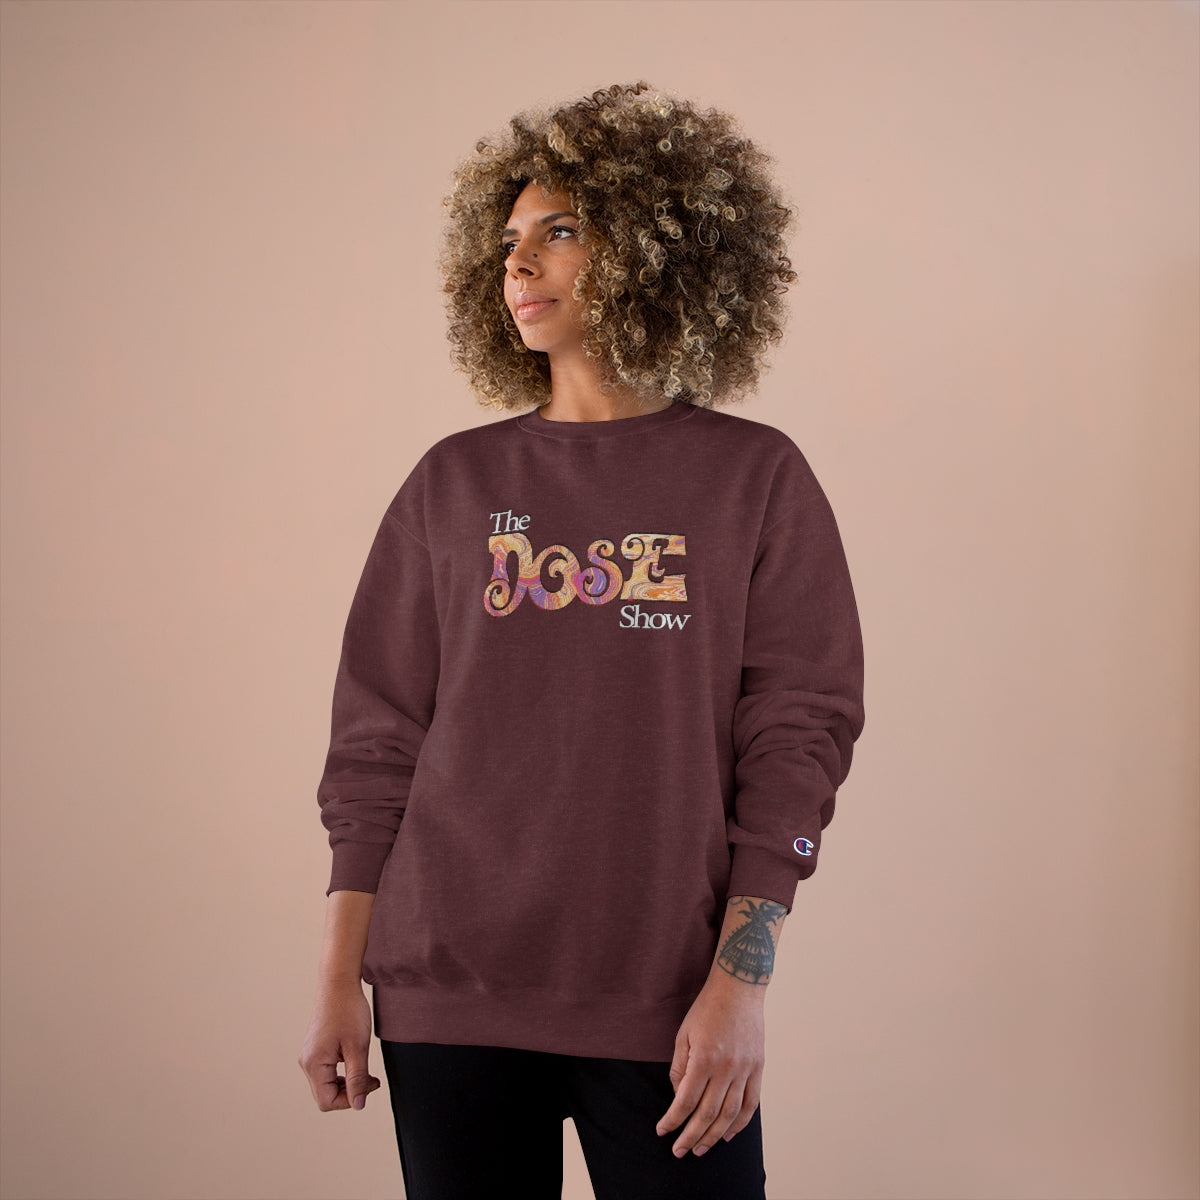 The Dose Show sweater